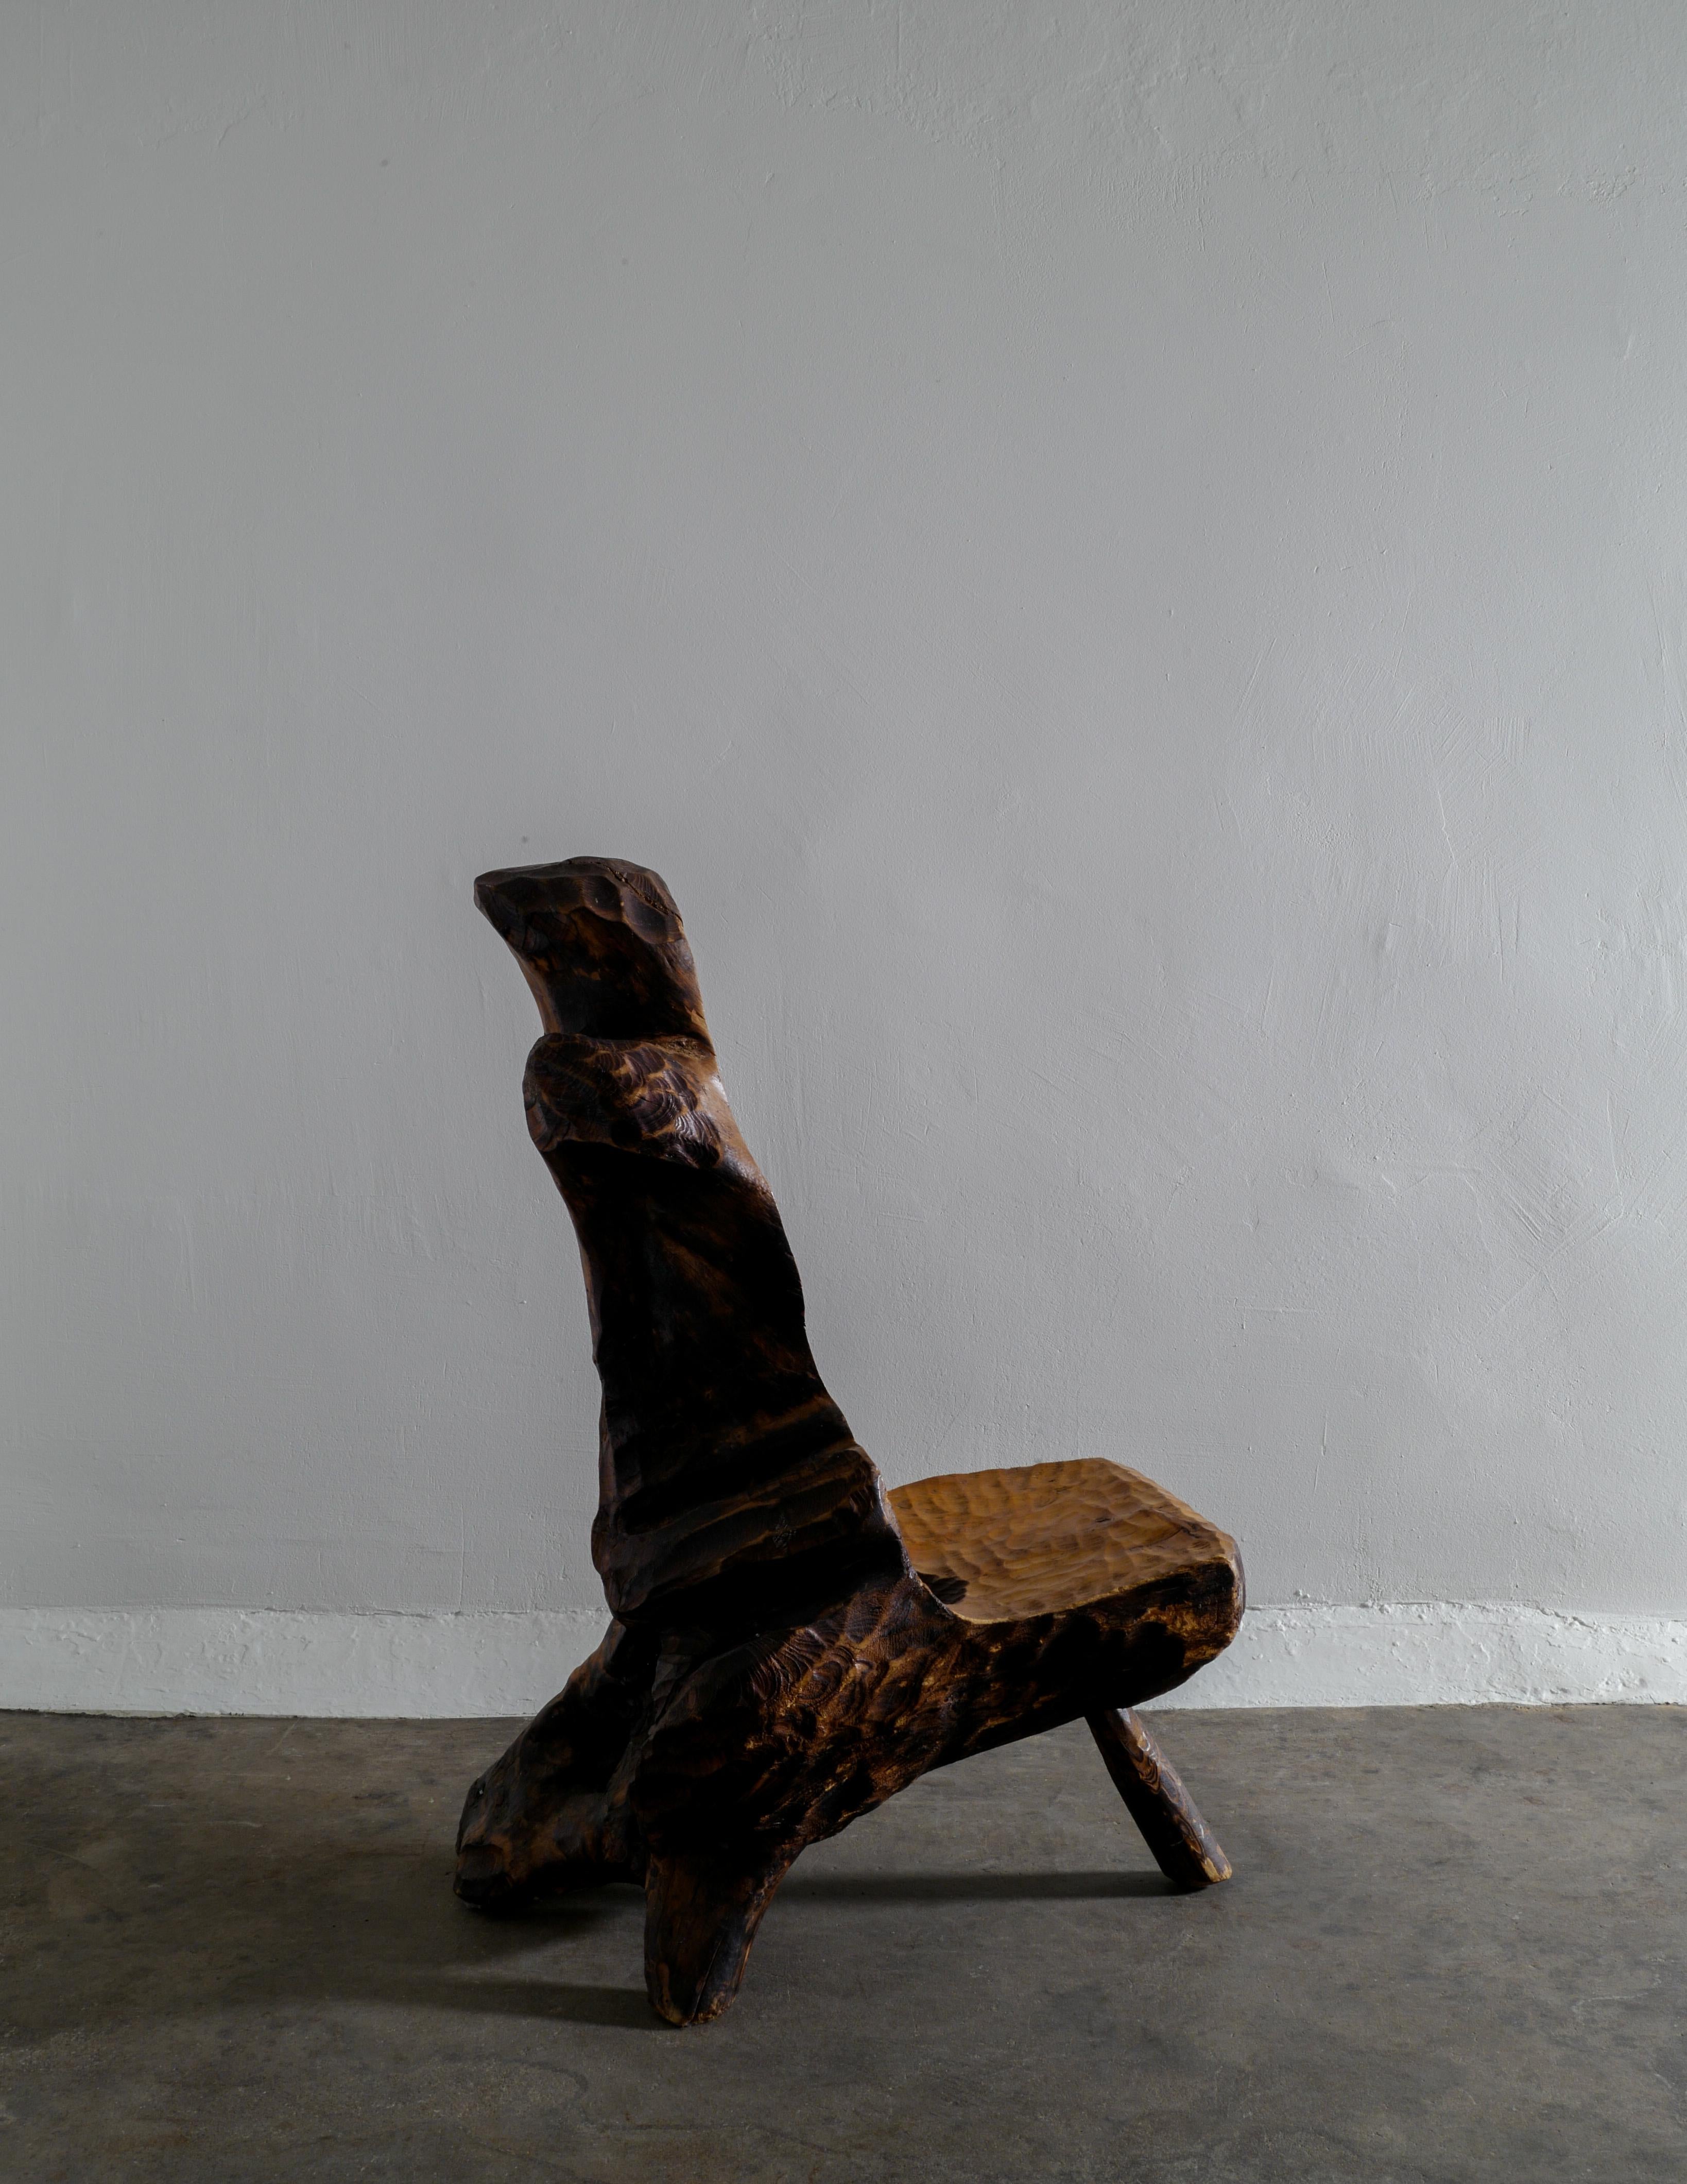 Mid-Century Modern Swedish Hand Made & Sculptural Wooden Chair in a Primitive and Wabi Sabi Style For Sale